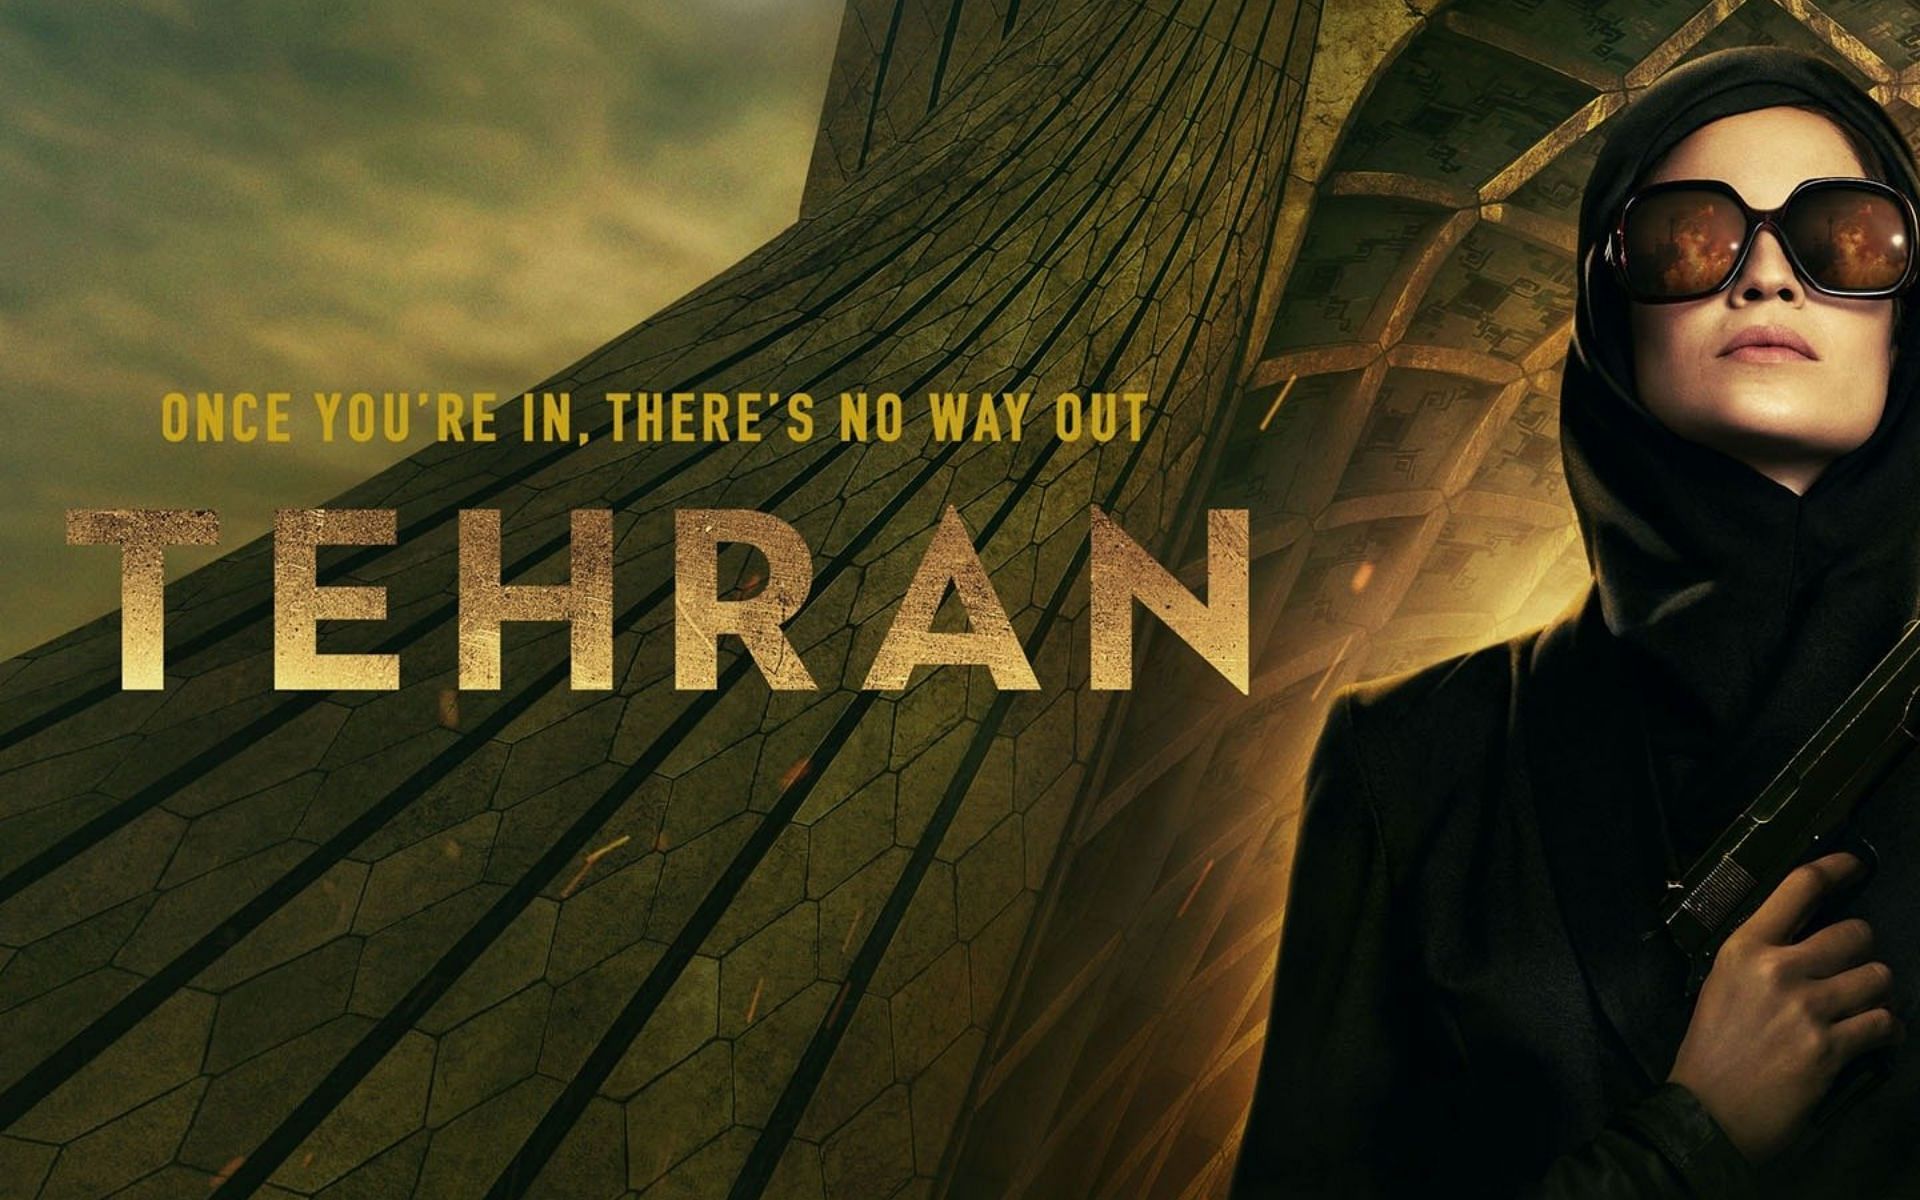 Tehran promotional poster (Image via Rotten Tomatoes)